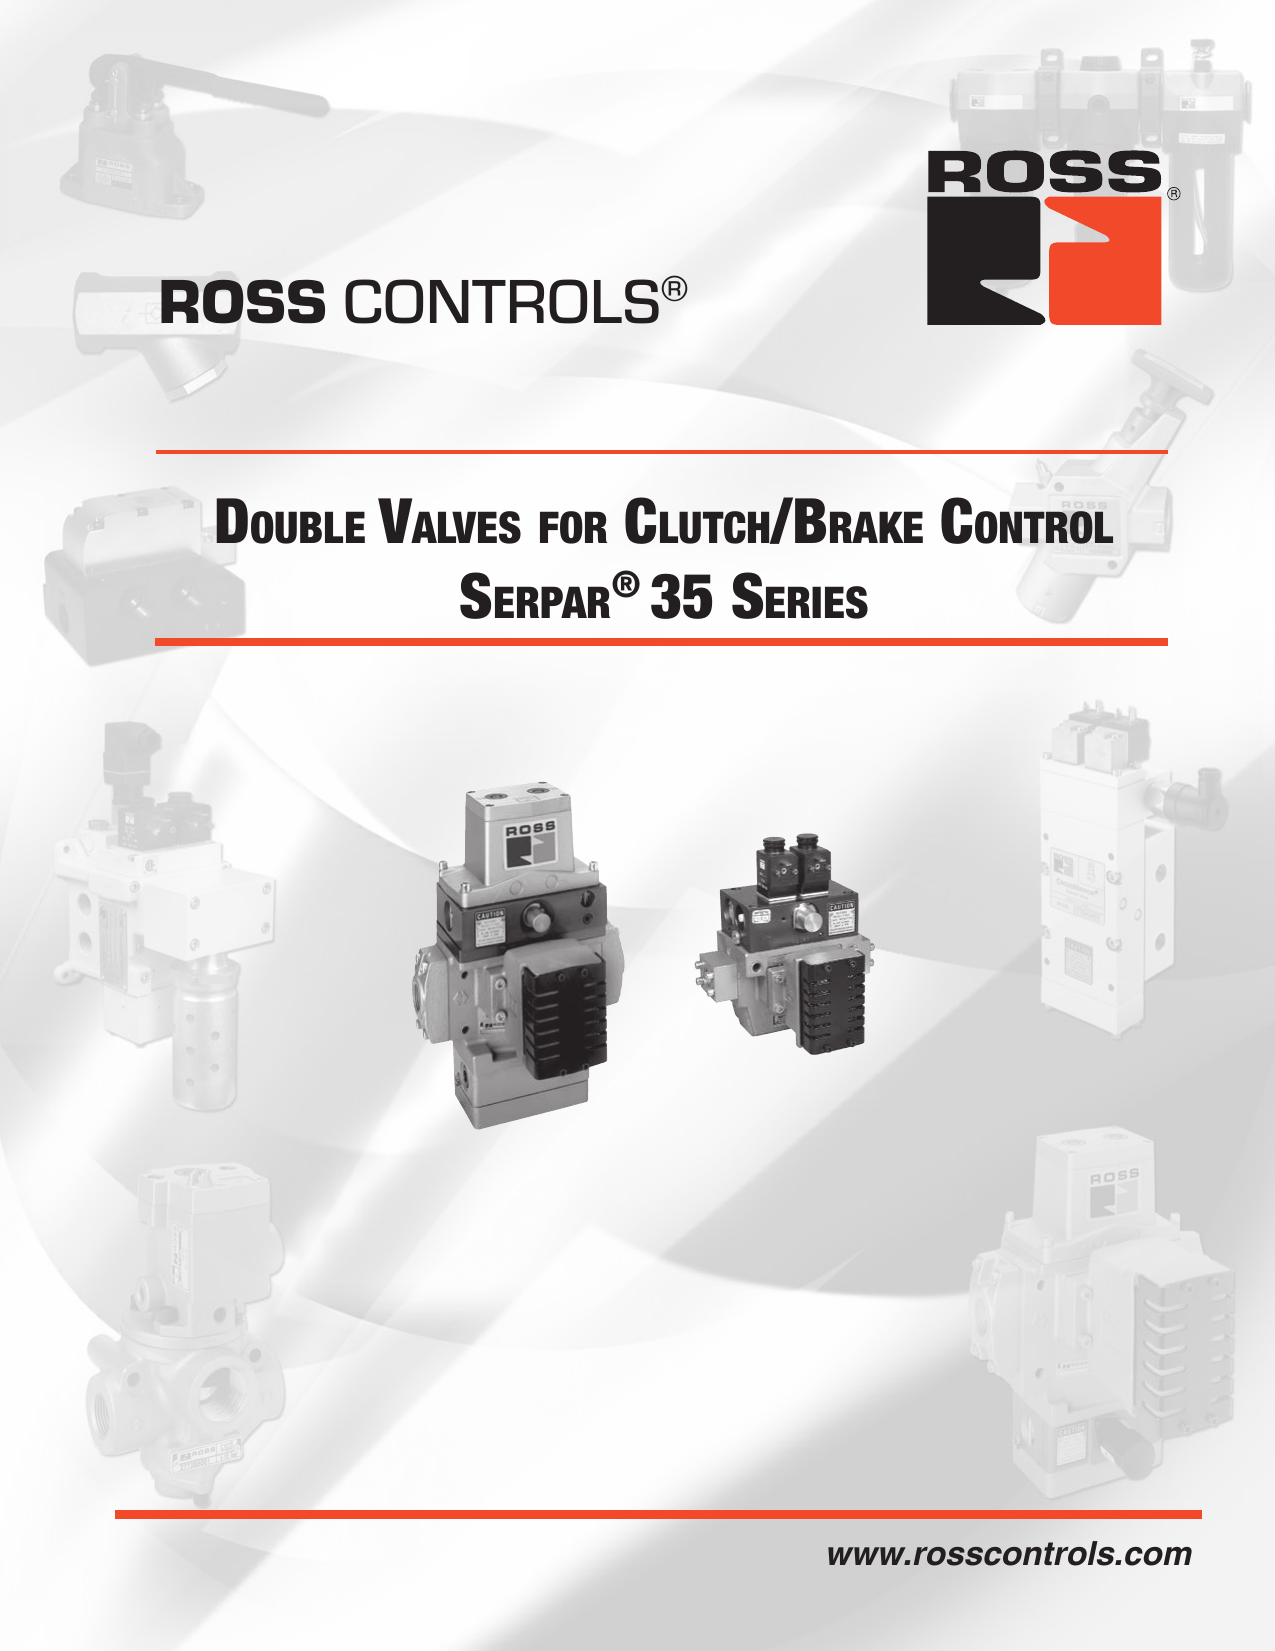 No Override Dynamic Monitoring Memory E-P Monitor Type Single Signal Input Ross Controls D3573A5161Z 35/SERPAR Series Solenoid Controlled Valve Ports 3/4 BSPP 110 VAC Ports 3/4 BSPP 110 VAC